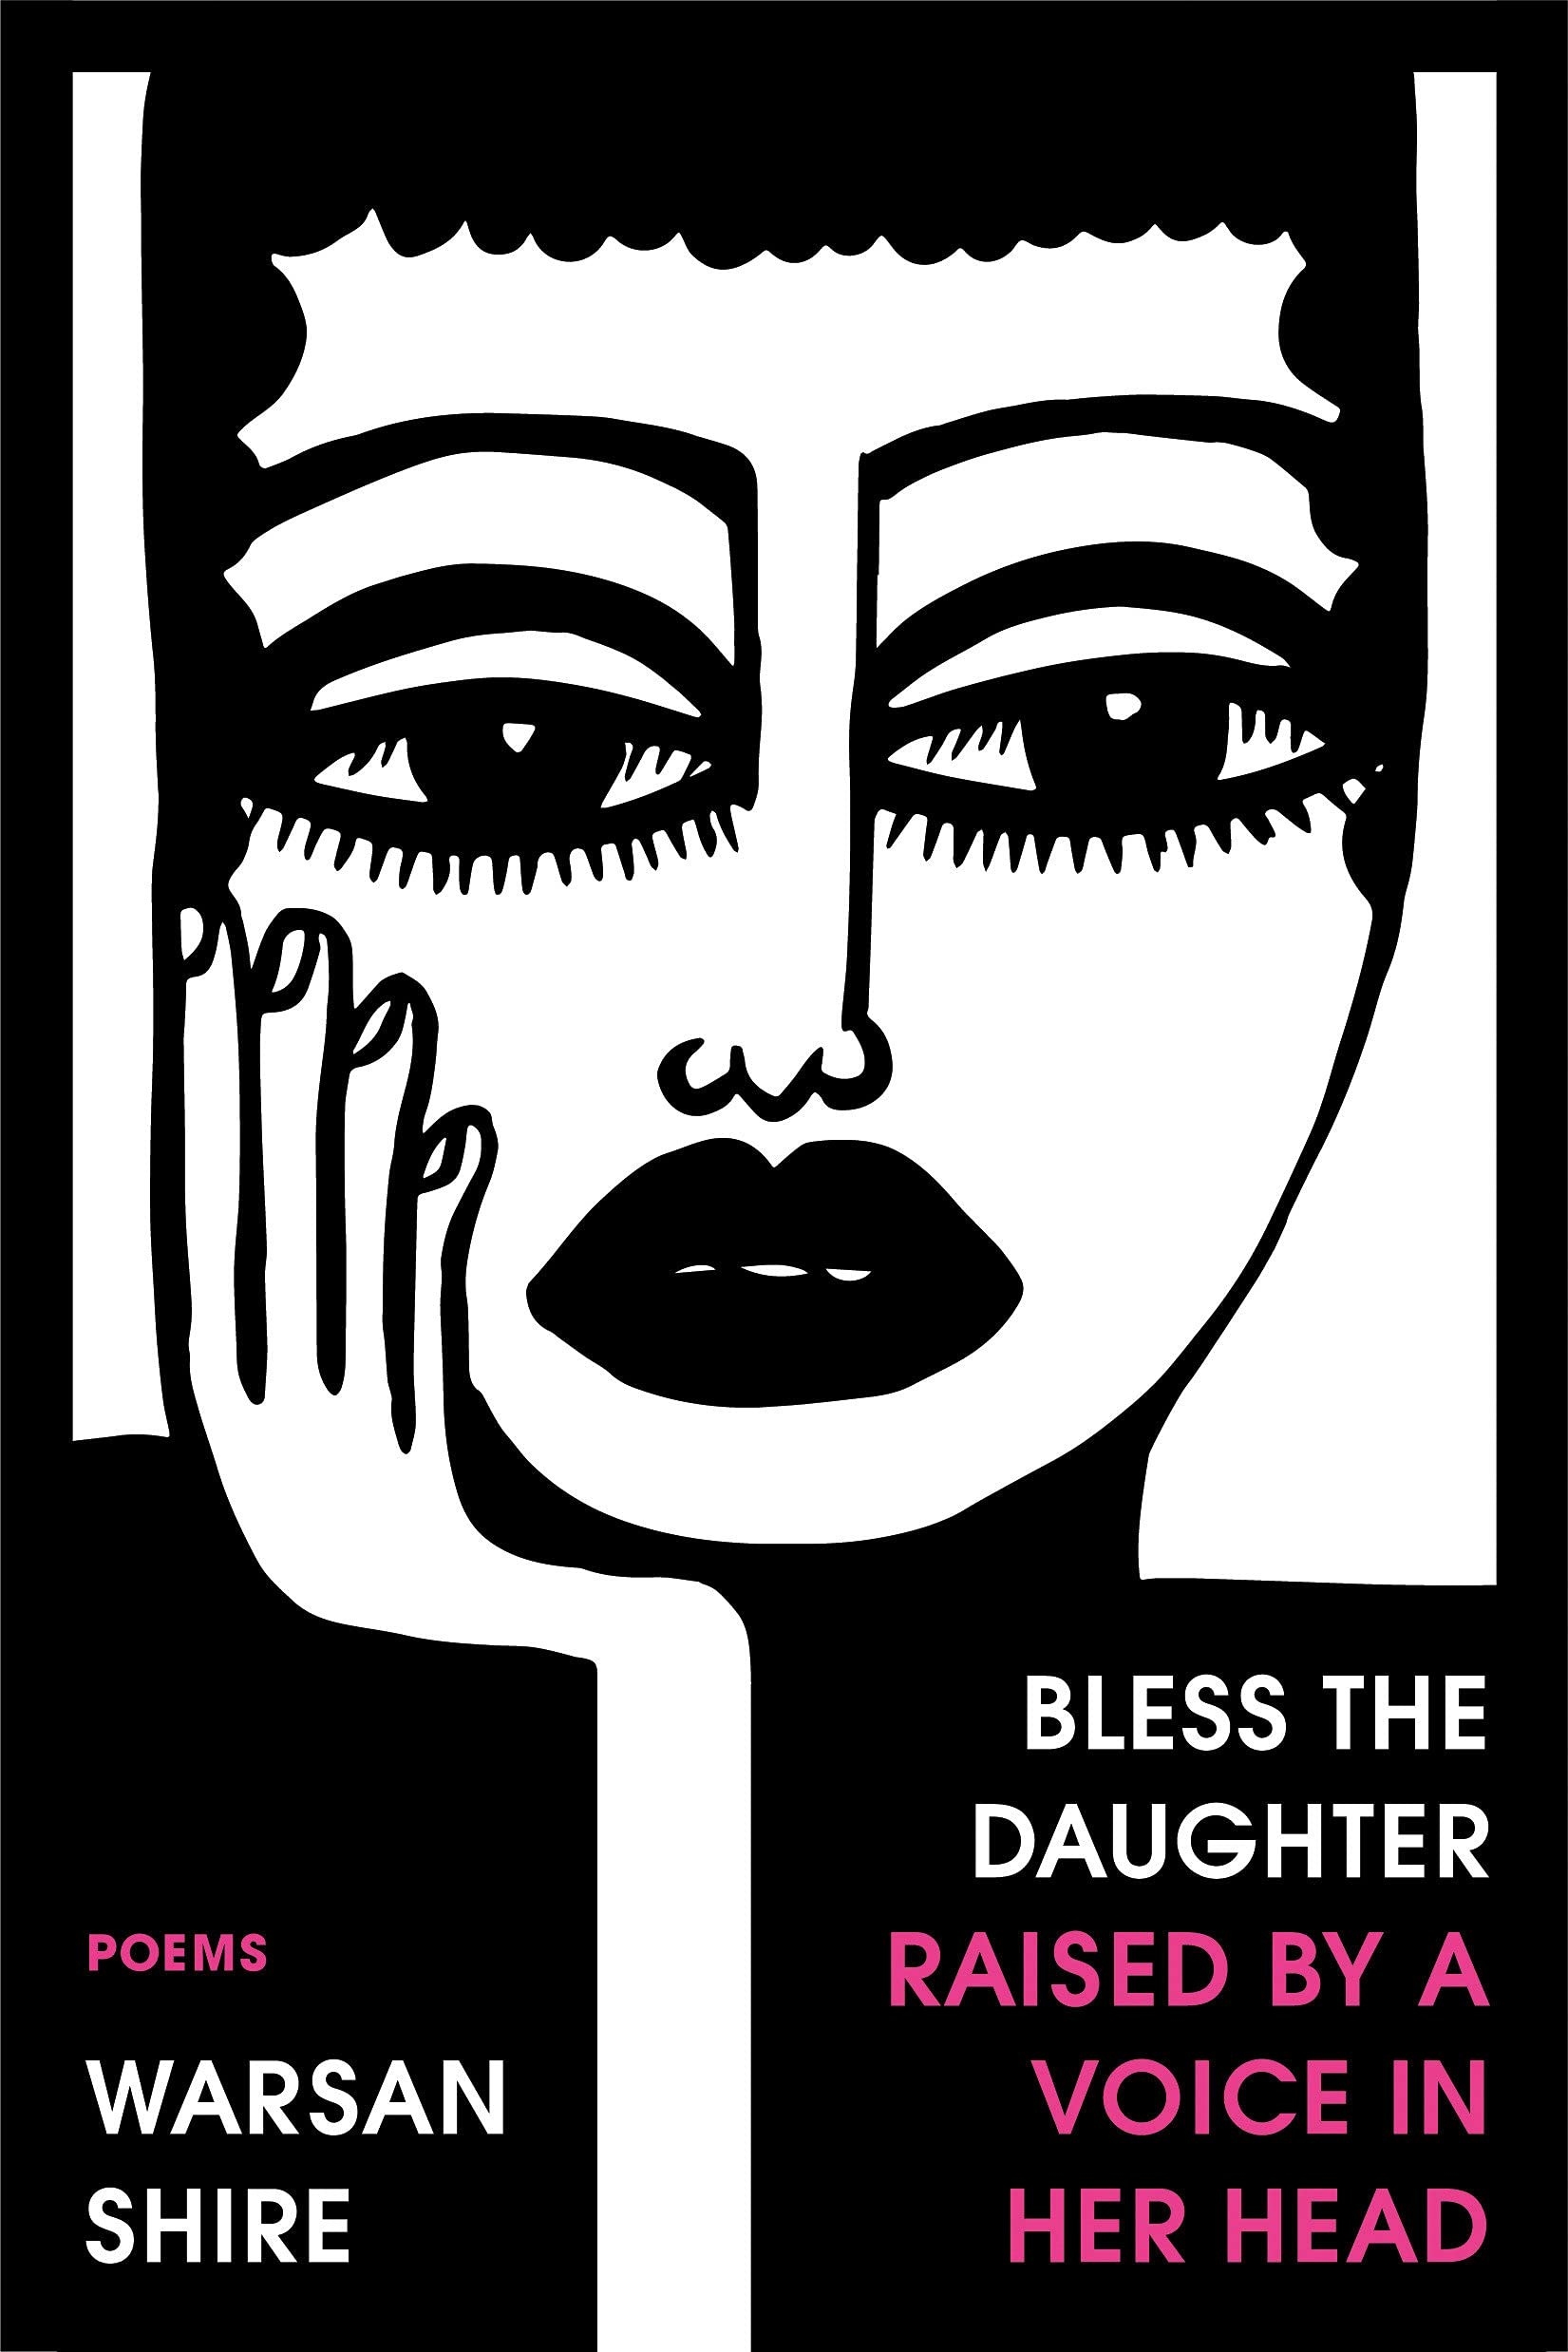 Black and white caricature with one hand resting on her face with white an pink words that read Bless The Daughter Raised by a Voice in Her Head, Poems Warsan Shire